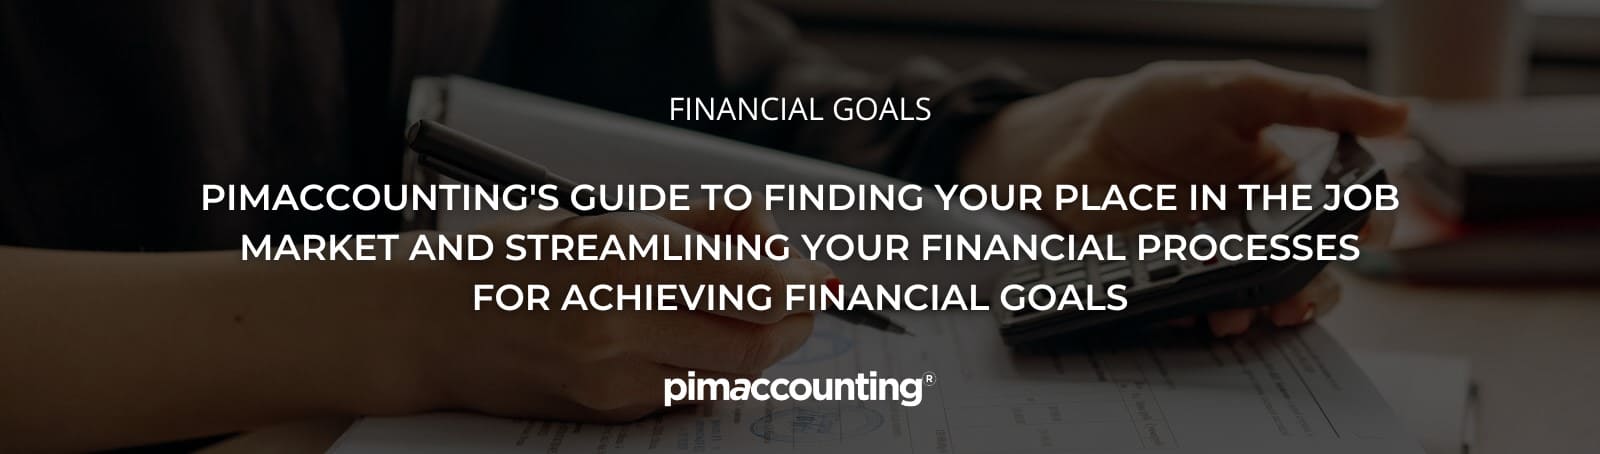 Pimaccounting's Guide to Finding Your Place in the Job Market and Streamlining Your Financial Processes for Achieving Financial Goals